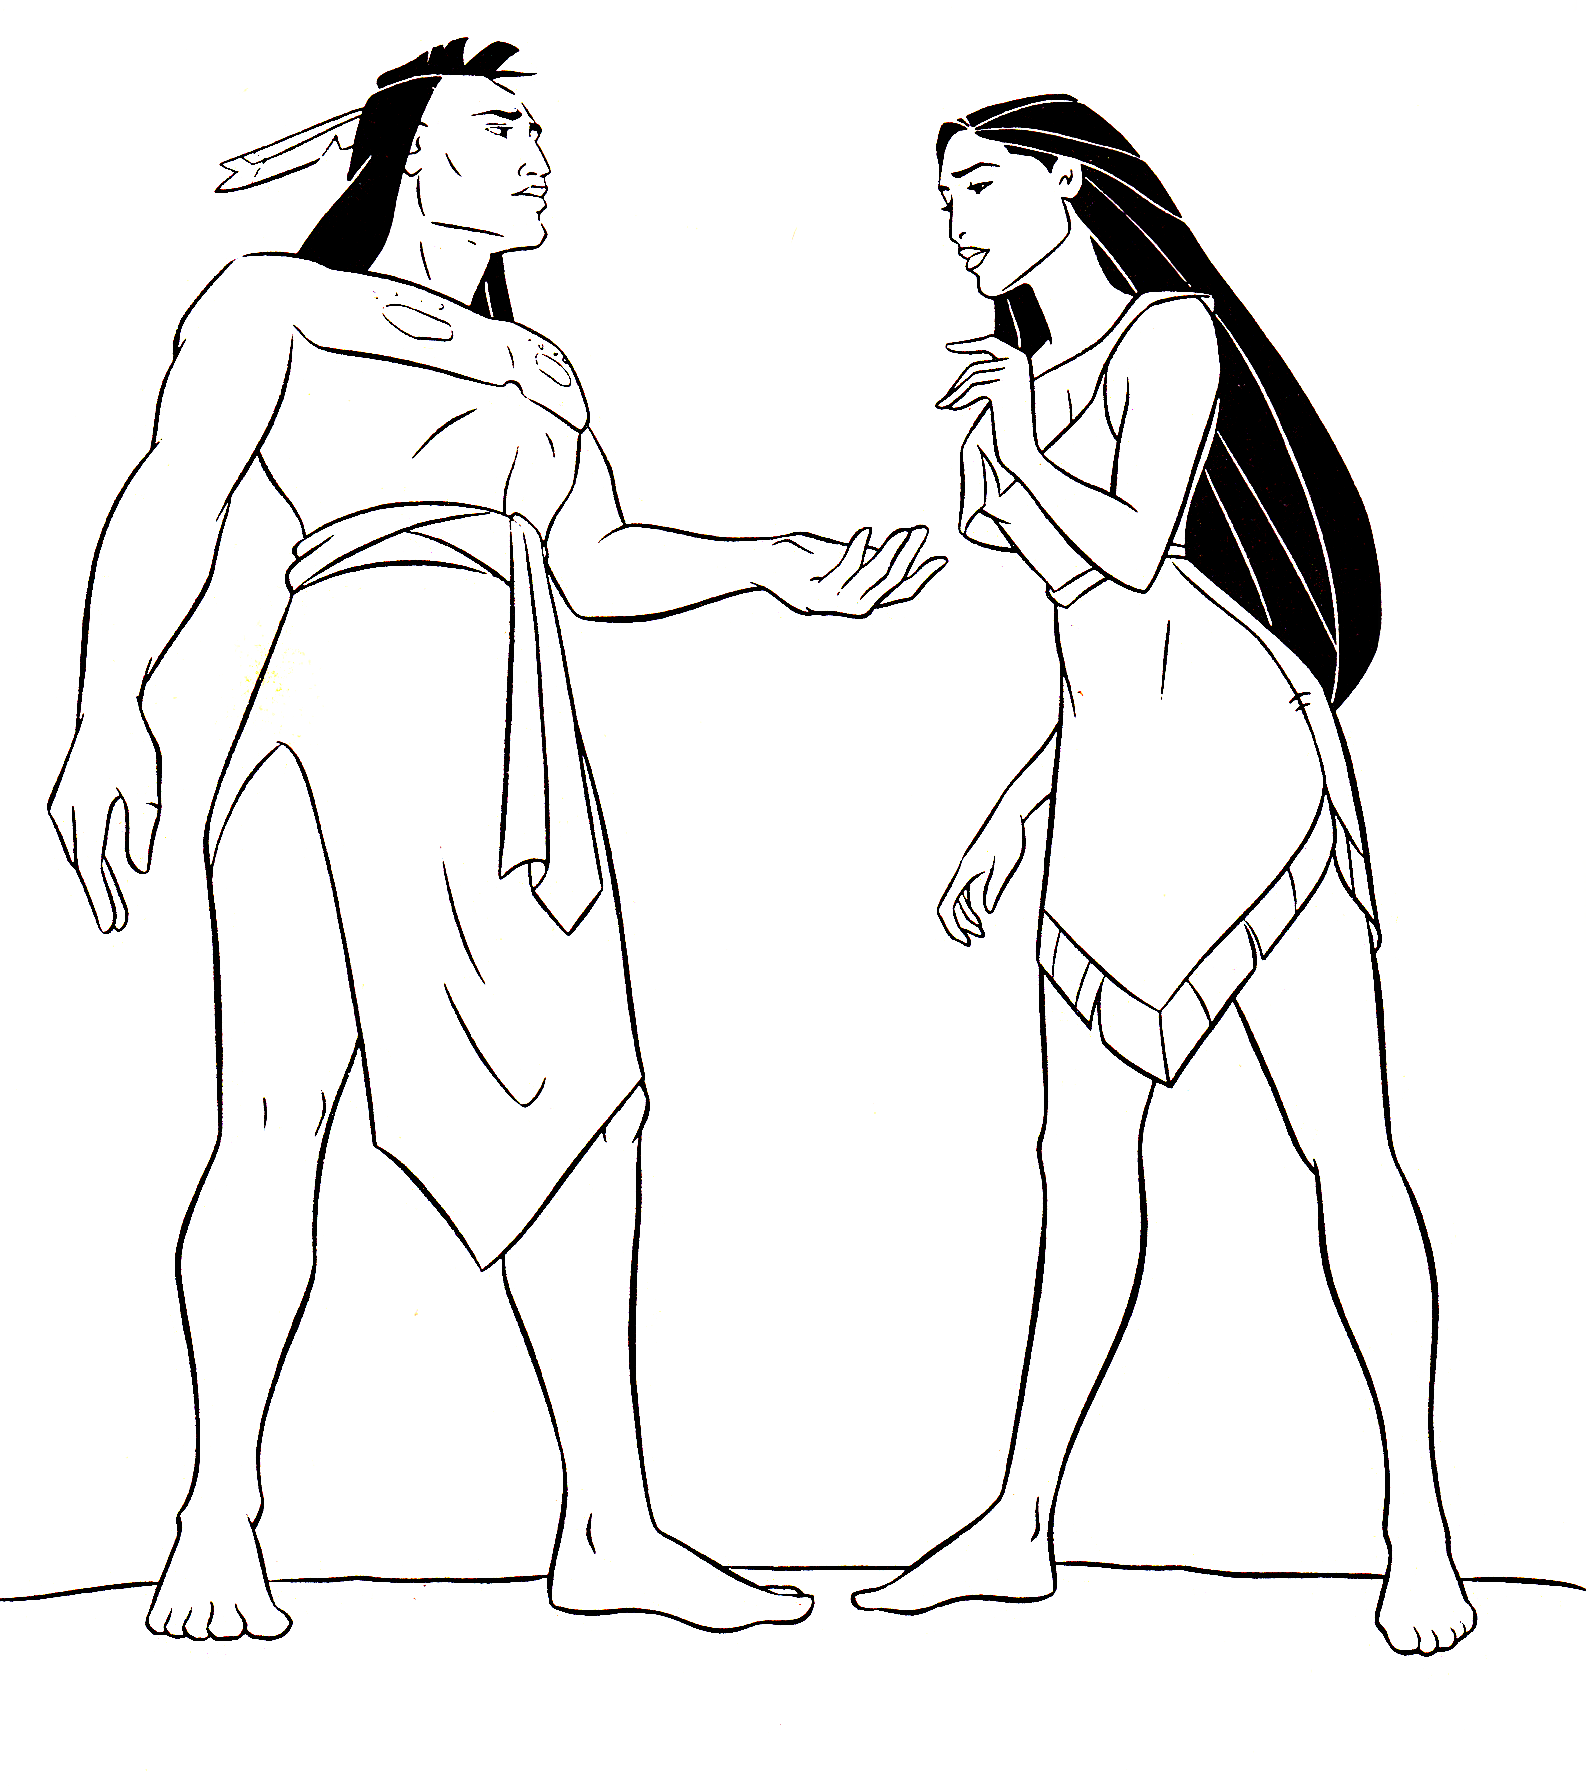 Kocoum Pocahontas Character Coloring Pages